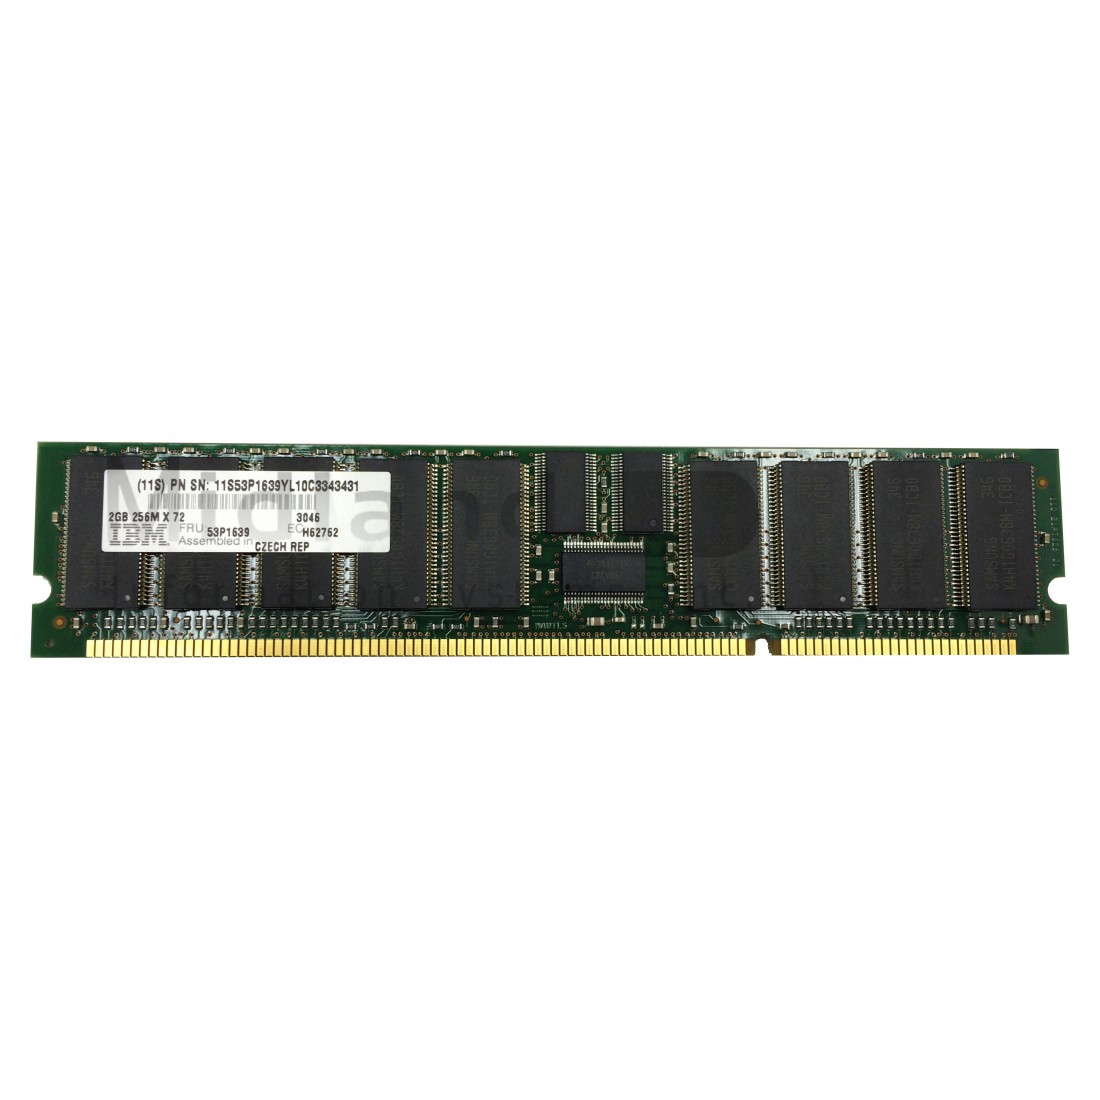 Ram 2048. As400 from IBM.